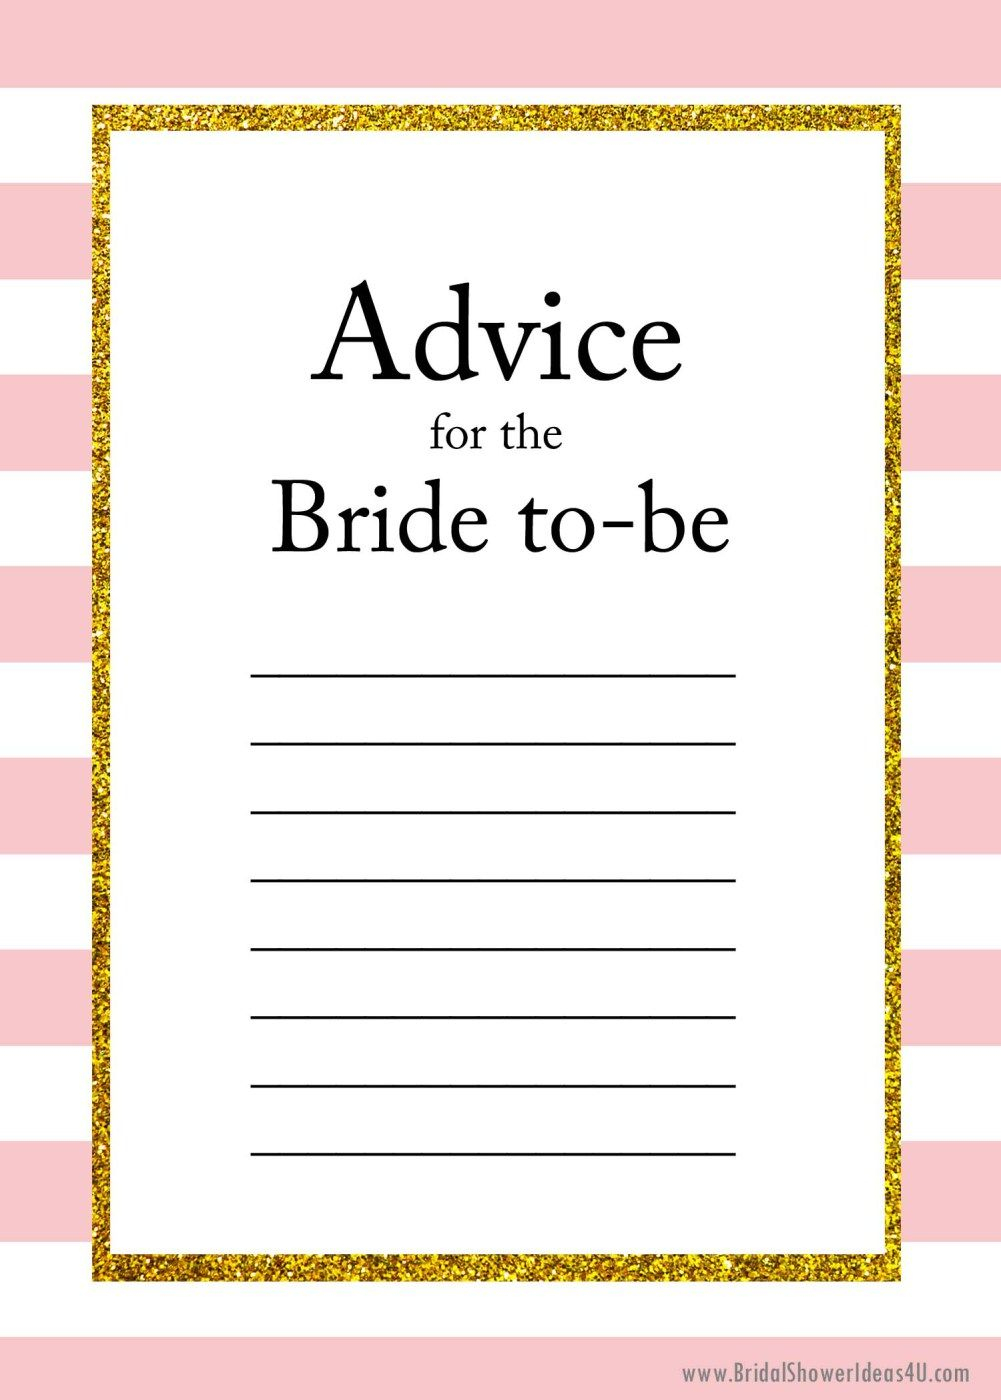 Free Printable Advice For The Bride To Be Cards | Friendship - Free Printable Bridal Shower Advice Cards